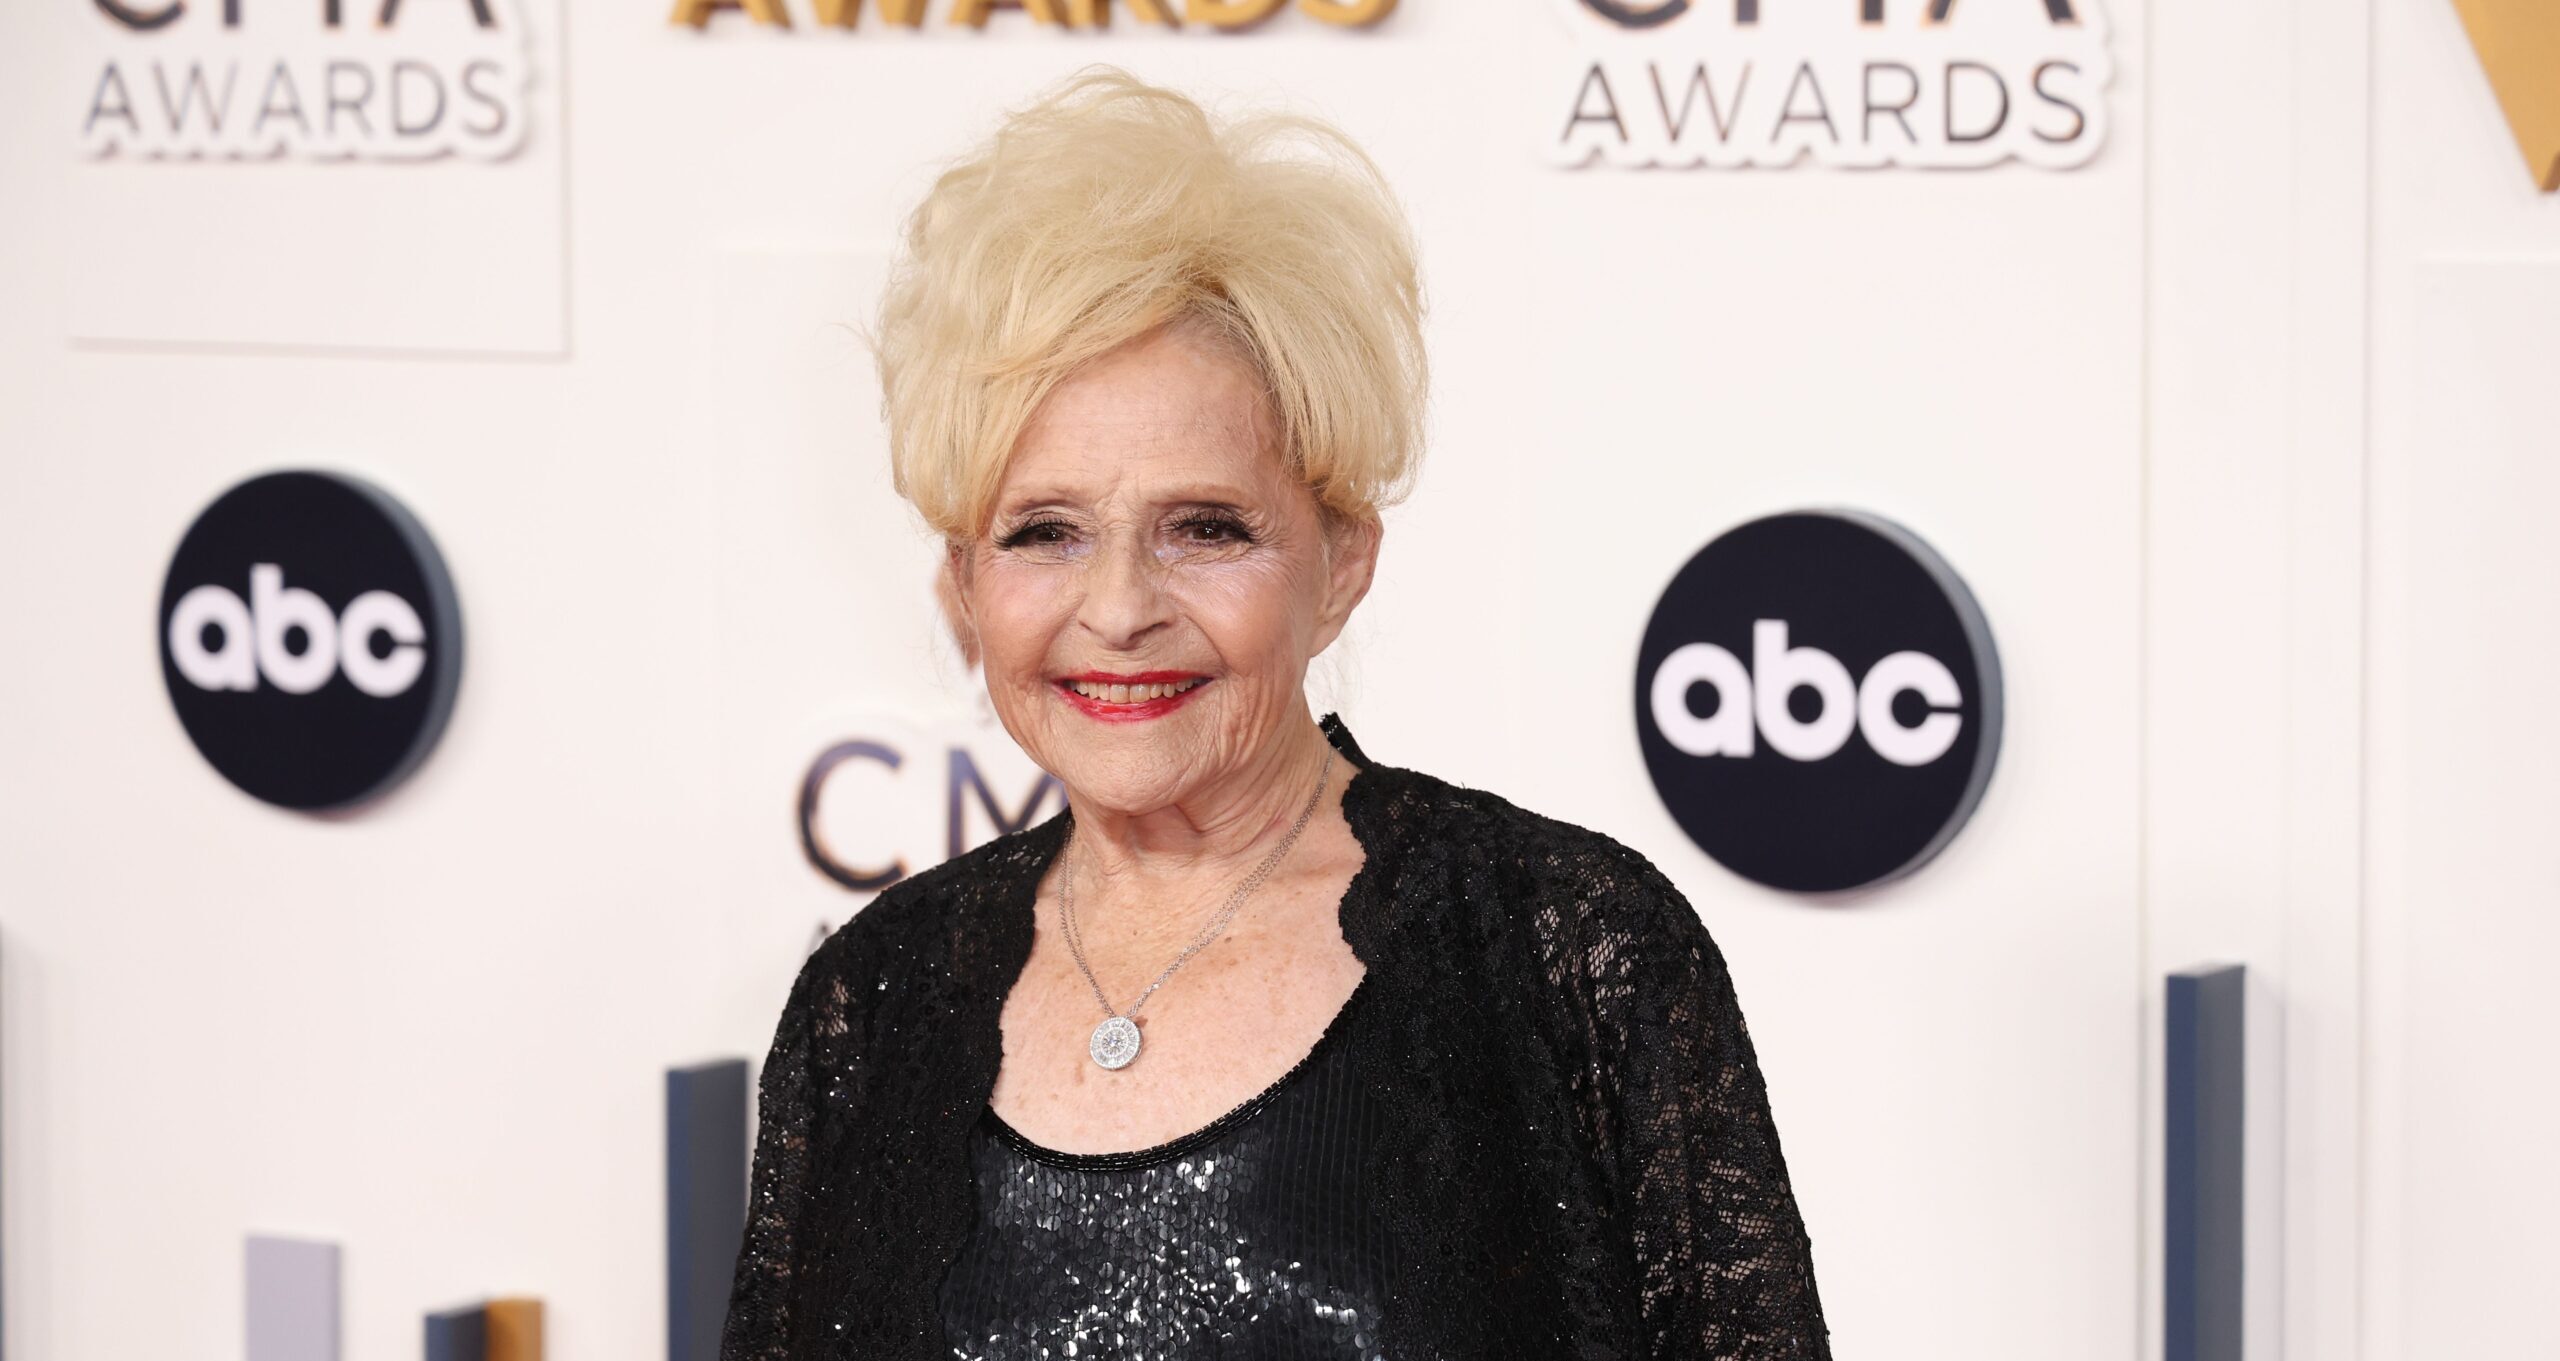 Brenda Lee Sets Several Hot 100 Records With “Rockin' Around the Christmas  Tree” - Hot Pop Today